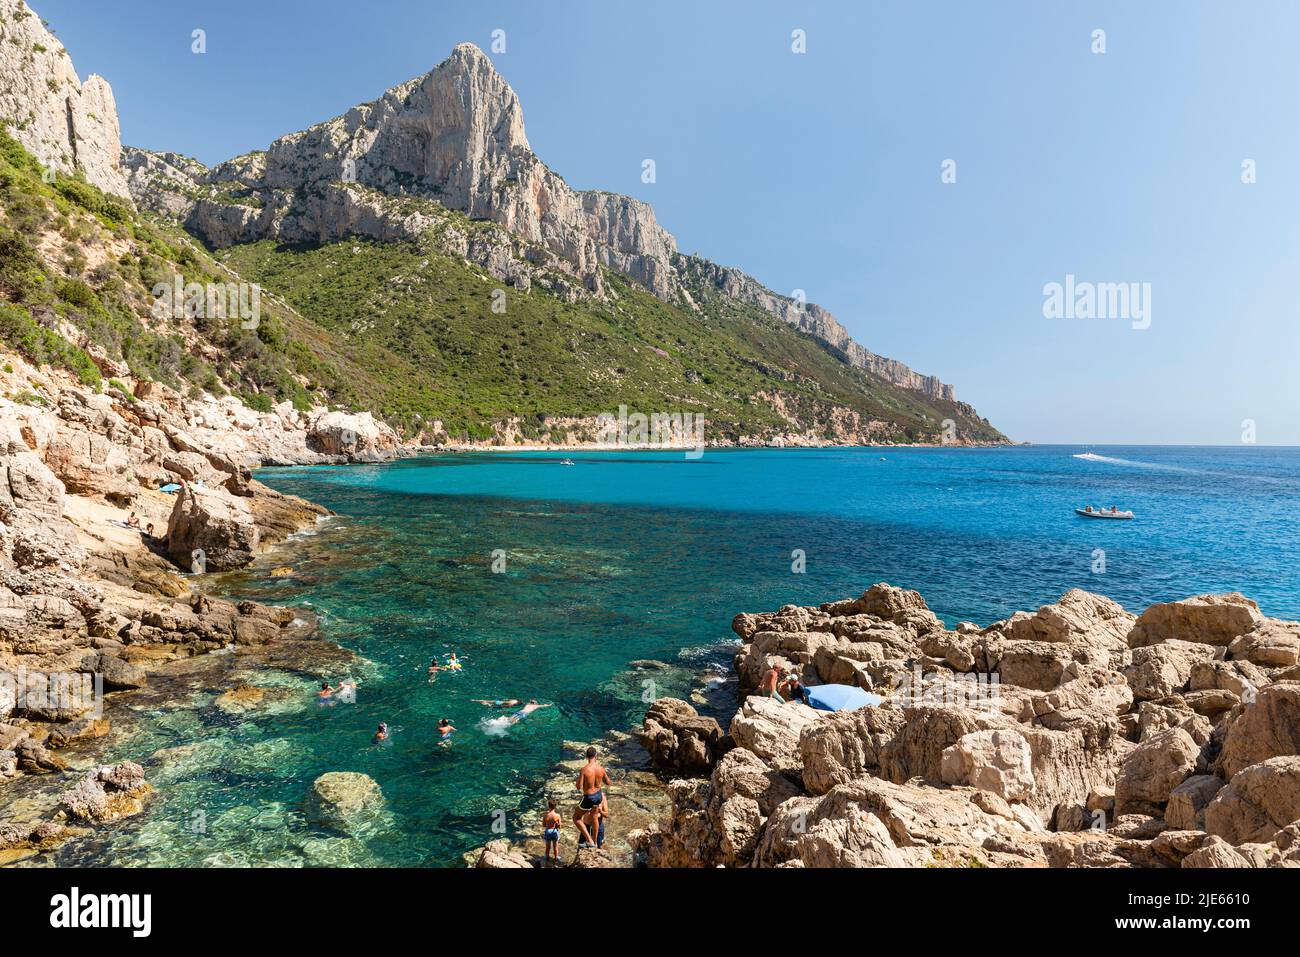 Swimmers in the turquoise sea on the cliff below the rocky walls of Punta Giradili on the east coast of Sardinia, shining in the morning sun Stock Photo